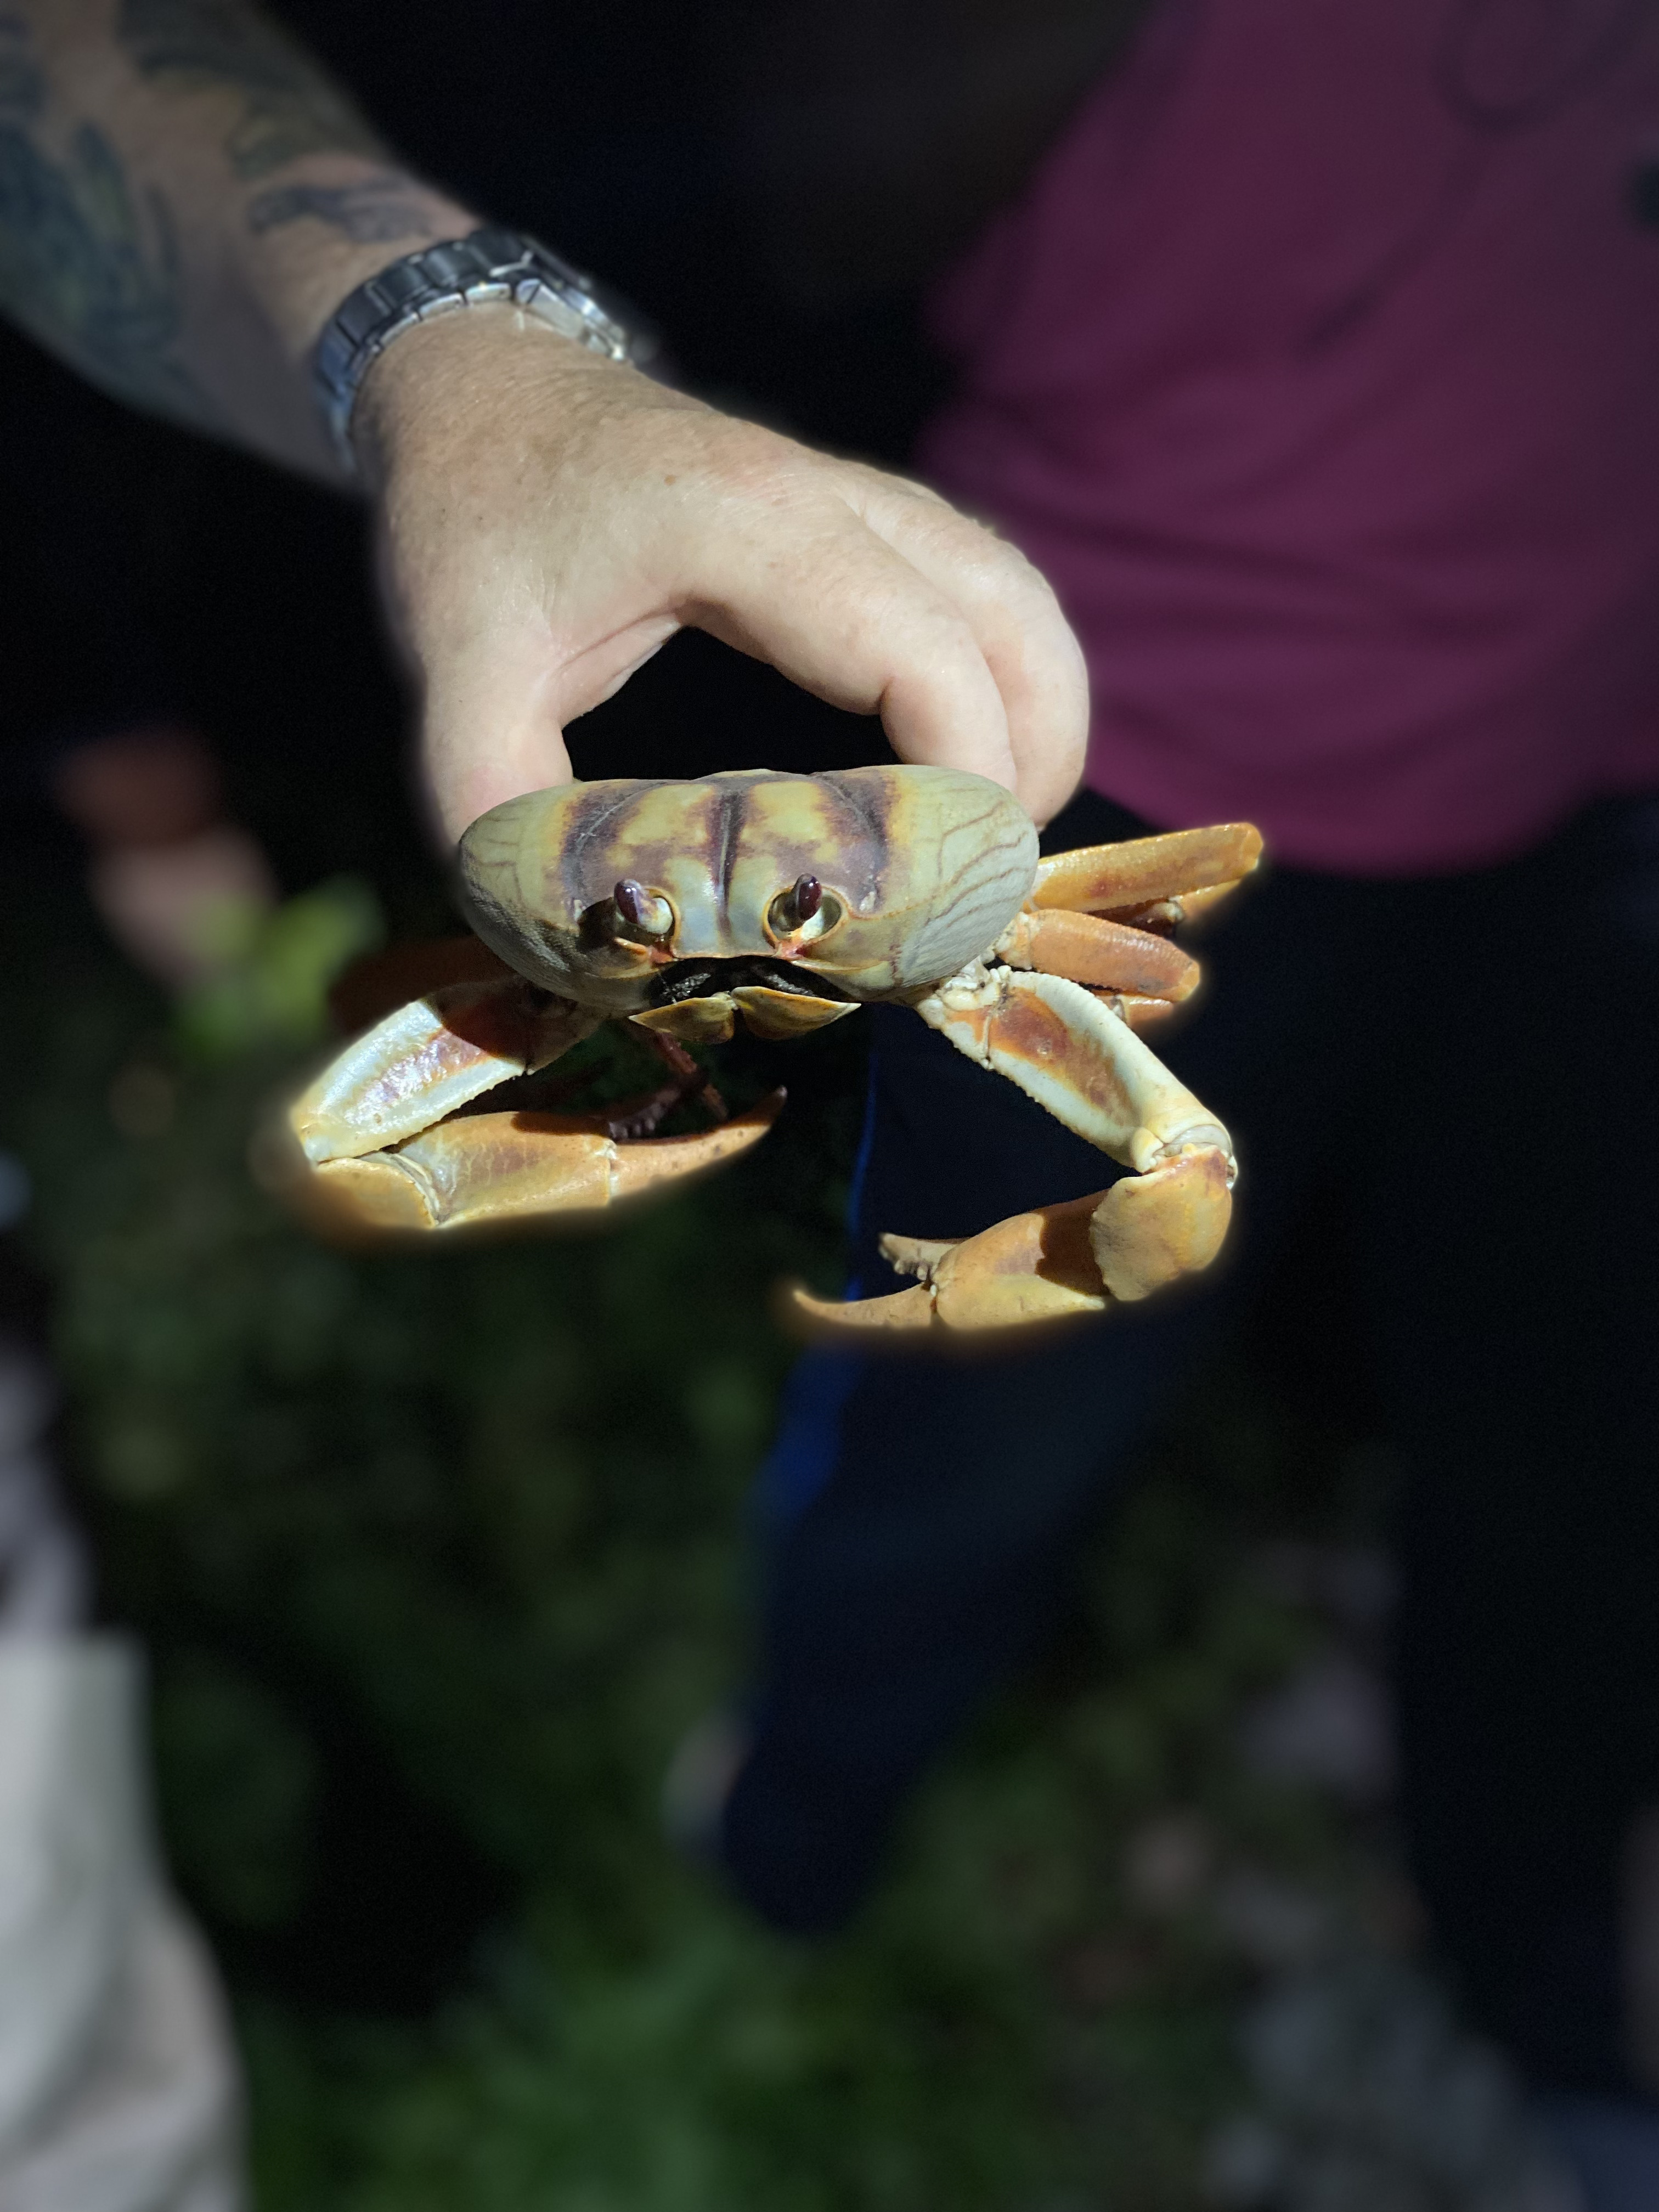 A land crab discovered during a nighttime hike in Statia